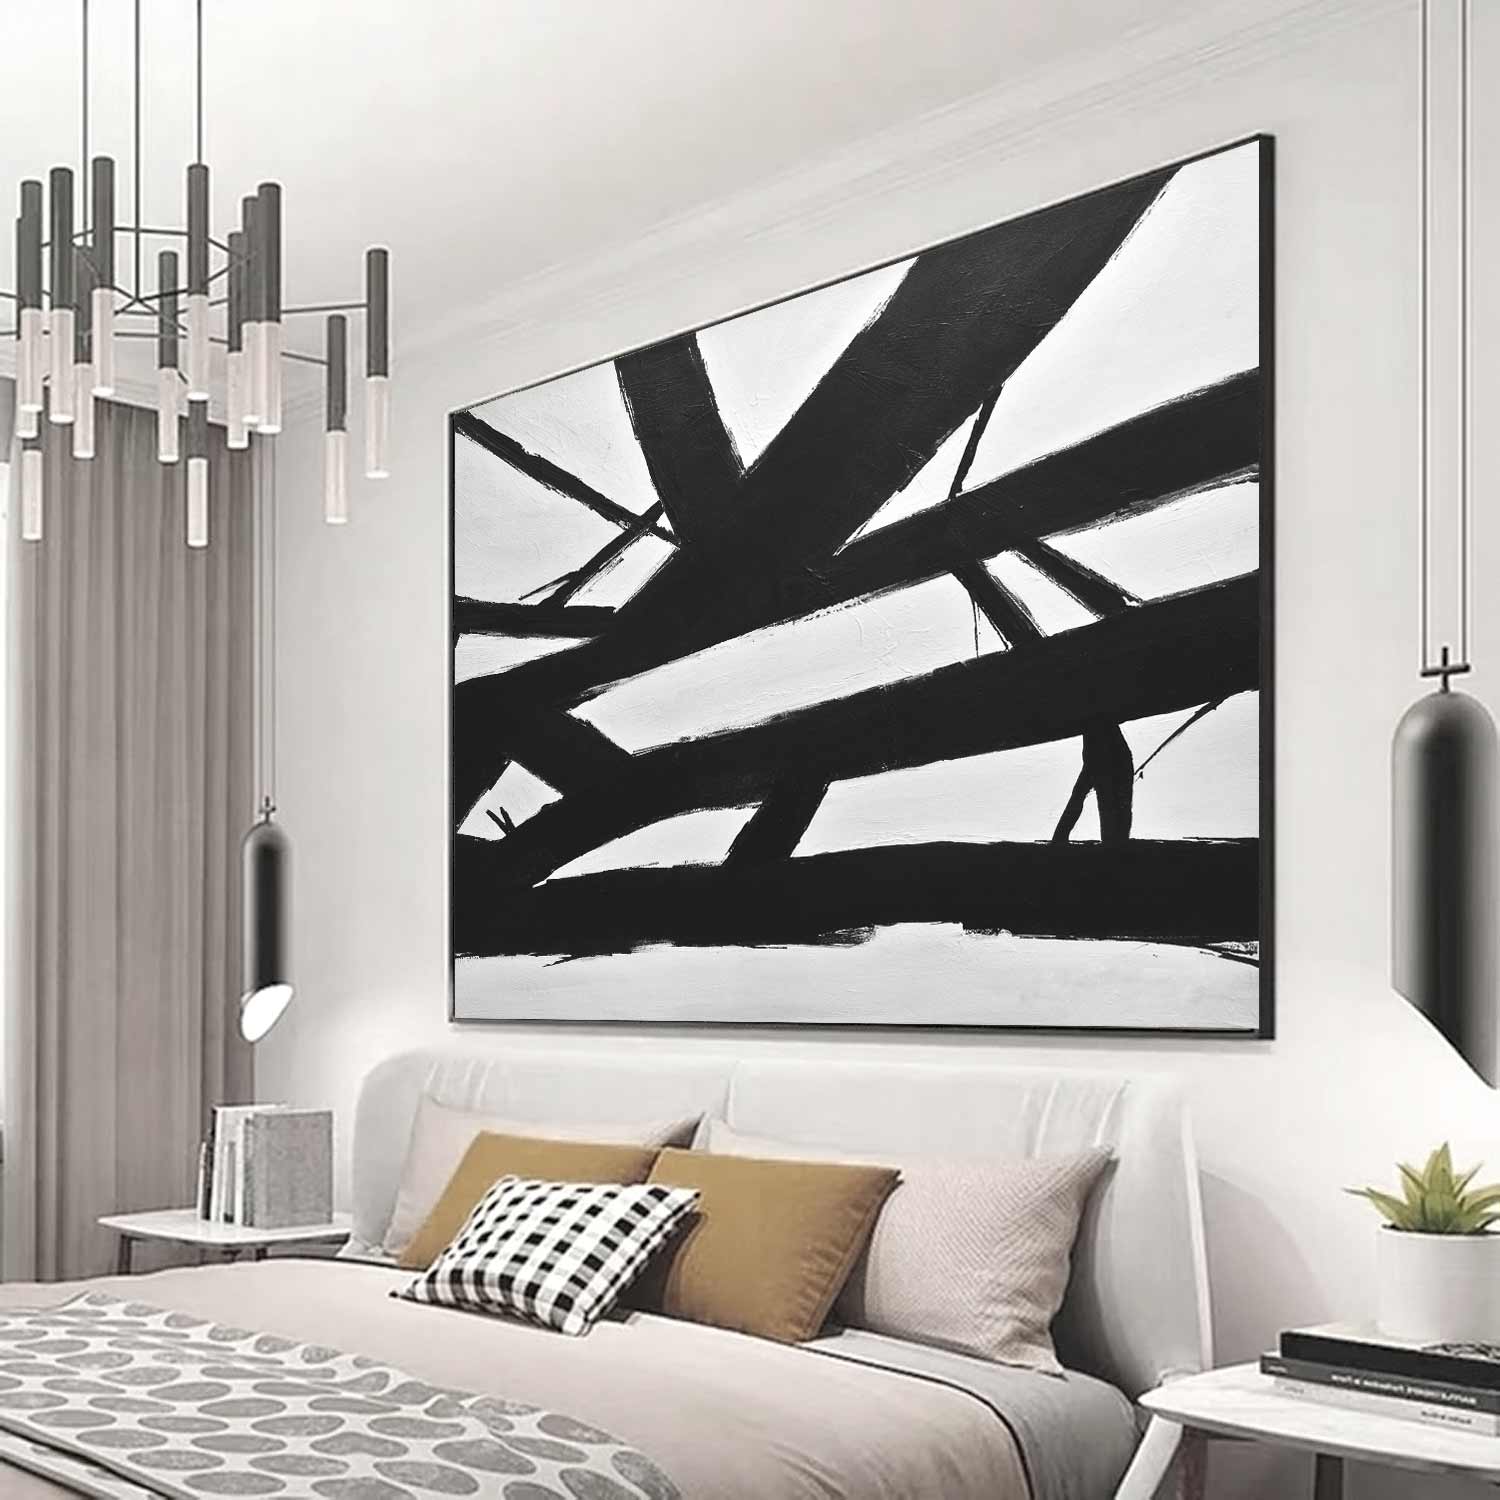 Geometric Black White Abstract Kline Painting "Crossing the Line"